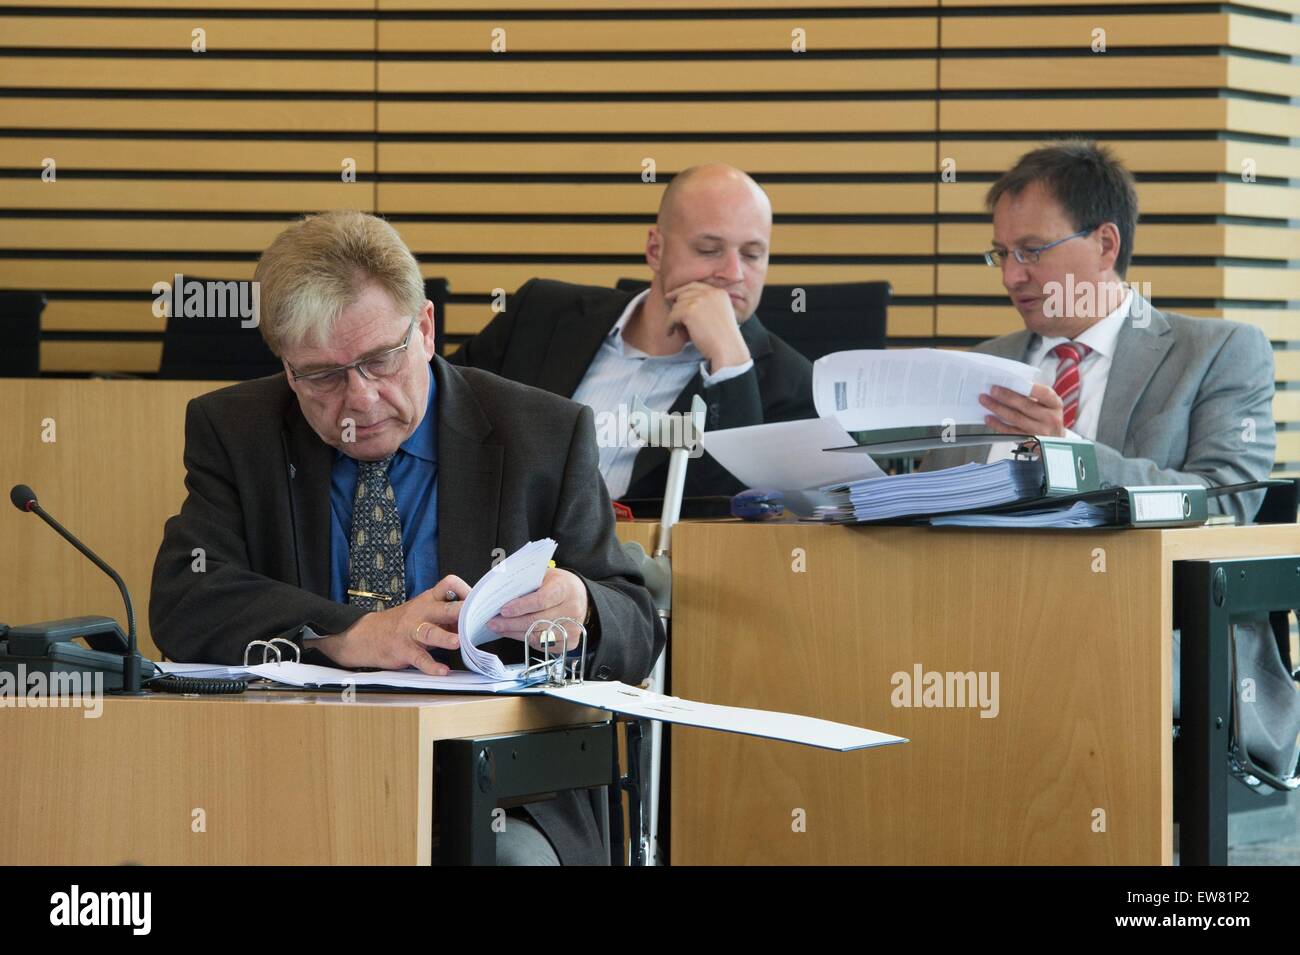 AfD representatives Siegfried Gentele (l-r), Jens Krumpe and Oskar Helmerich in the Landtag of Thuringia in Erfurt, Germany, 19 JUne 2015. Among other things, the representatives will vote on the state's budget for 2015. PHOTO: SEBASTIAN KAHNERT/DPA Stock Photo